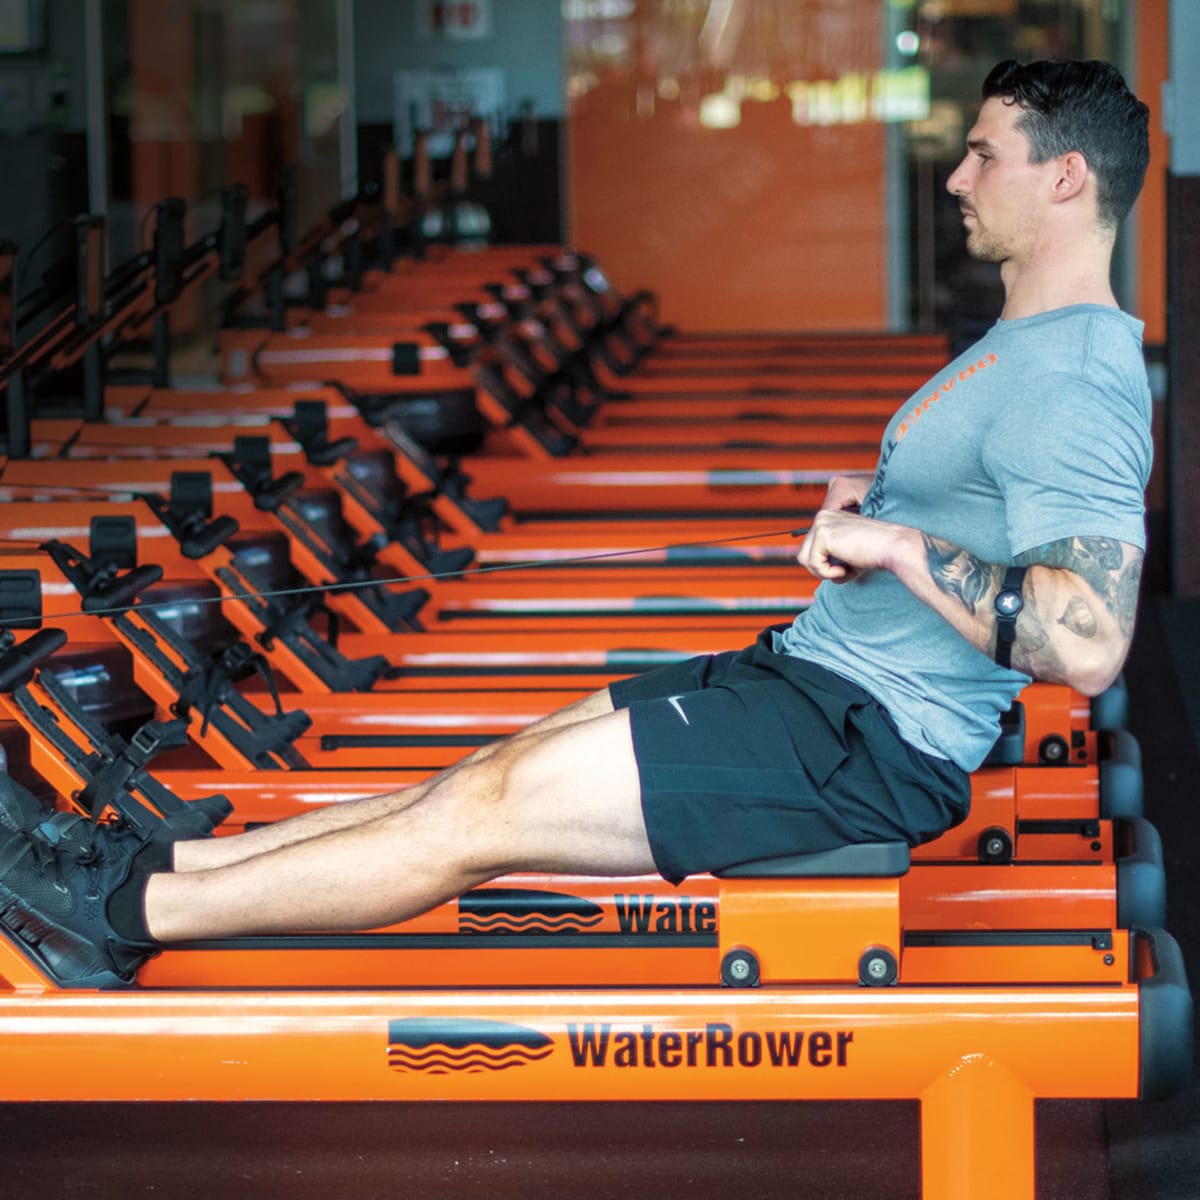 4 tips for crushing your first Orangetheory class—straight from